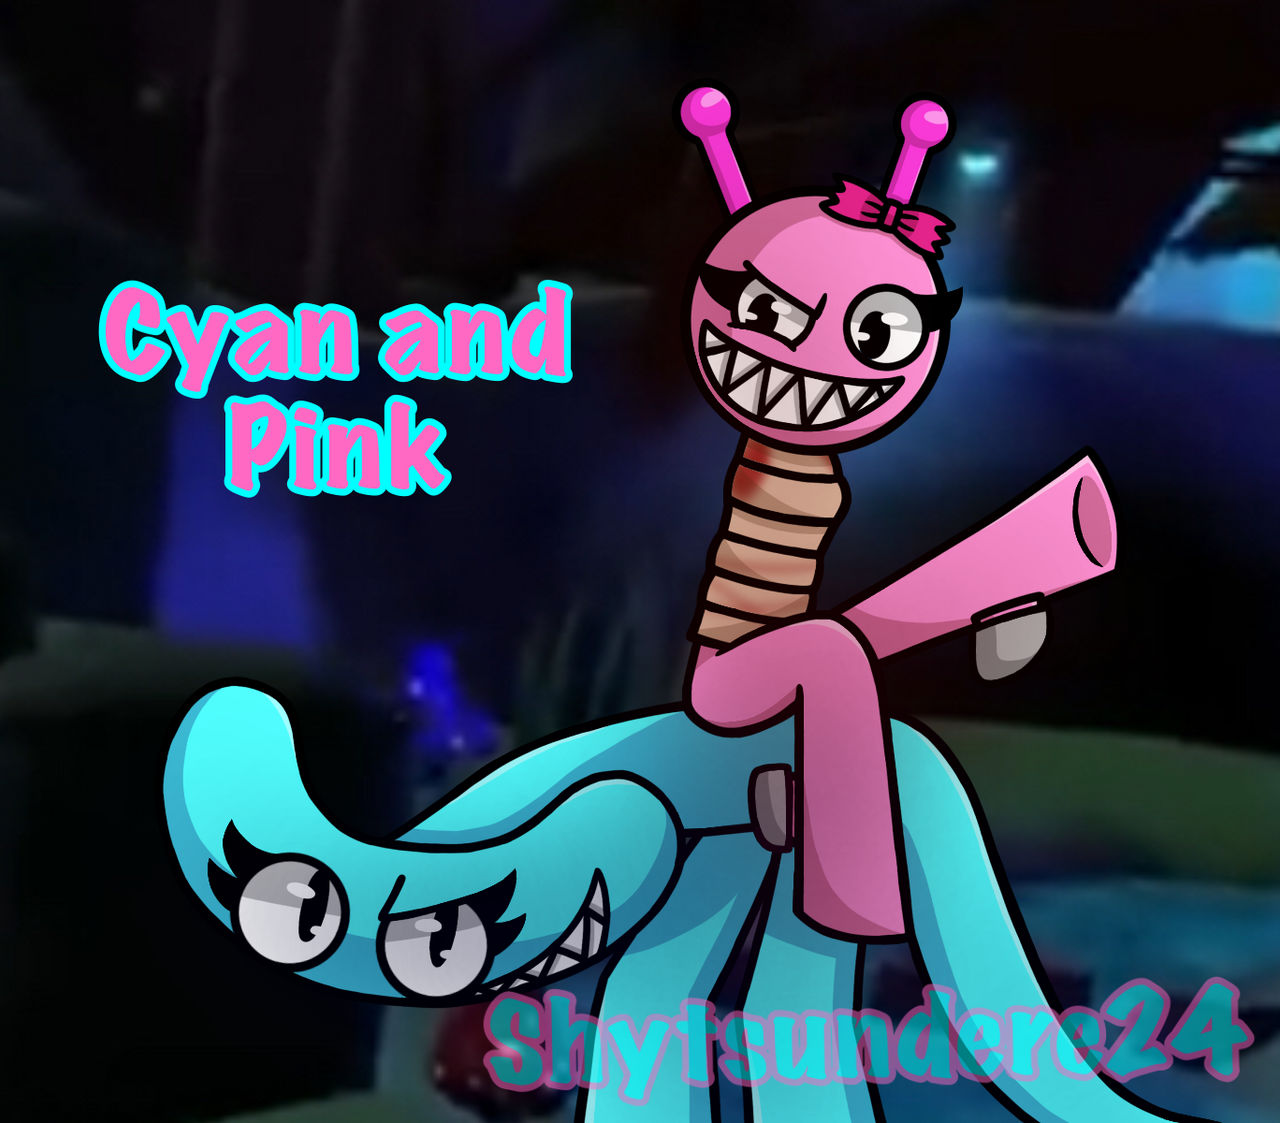 Cyan and Pink (The girls of Rainbow Friends) by Shytsundere24 on DeviantArt